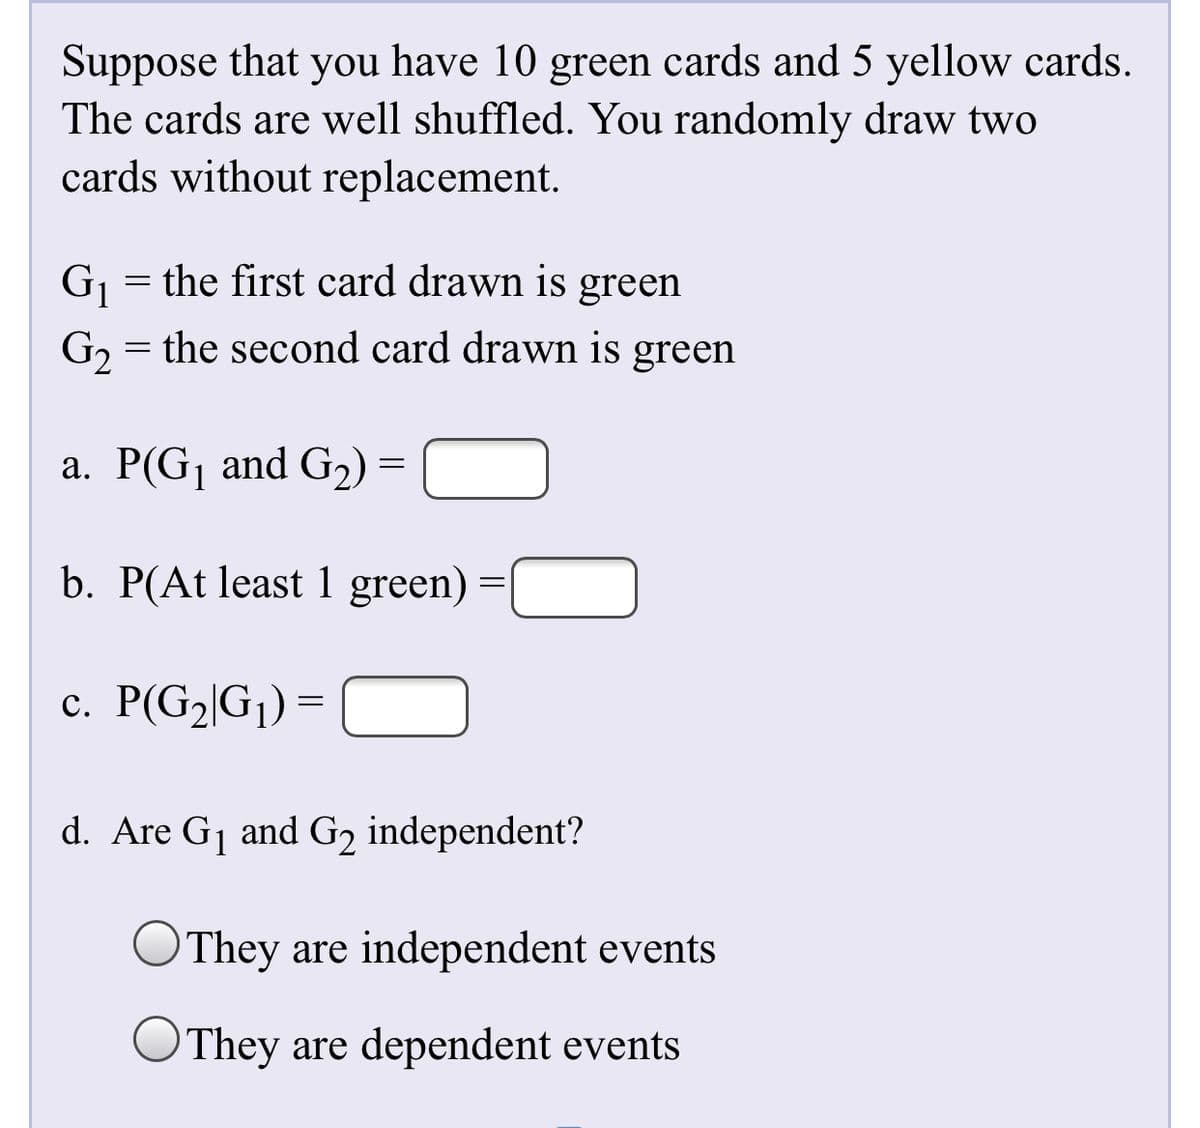 Suppose that you have 10 green cards and 5 yellow cards.
The cards are well shuffled. You randomly draw two
cards without replacement.
Gj = the first card drawn is green
G, = the second card drawn is green
%3D
a. P(G¡ and G2) =
b. P(At least 1 green) :
c. P(G2|G¡) =
d. Are Gj and G2 independent?
They are independent events
They are dependent events
